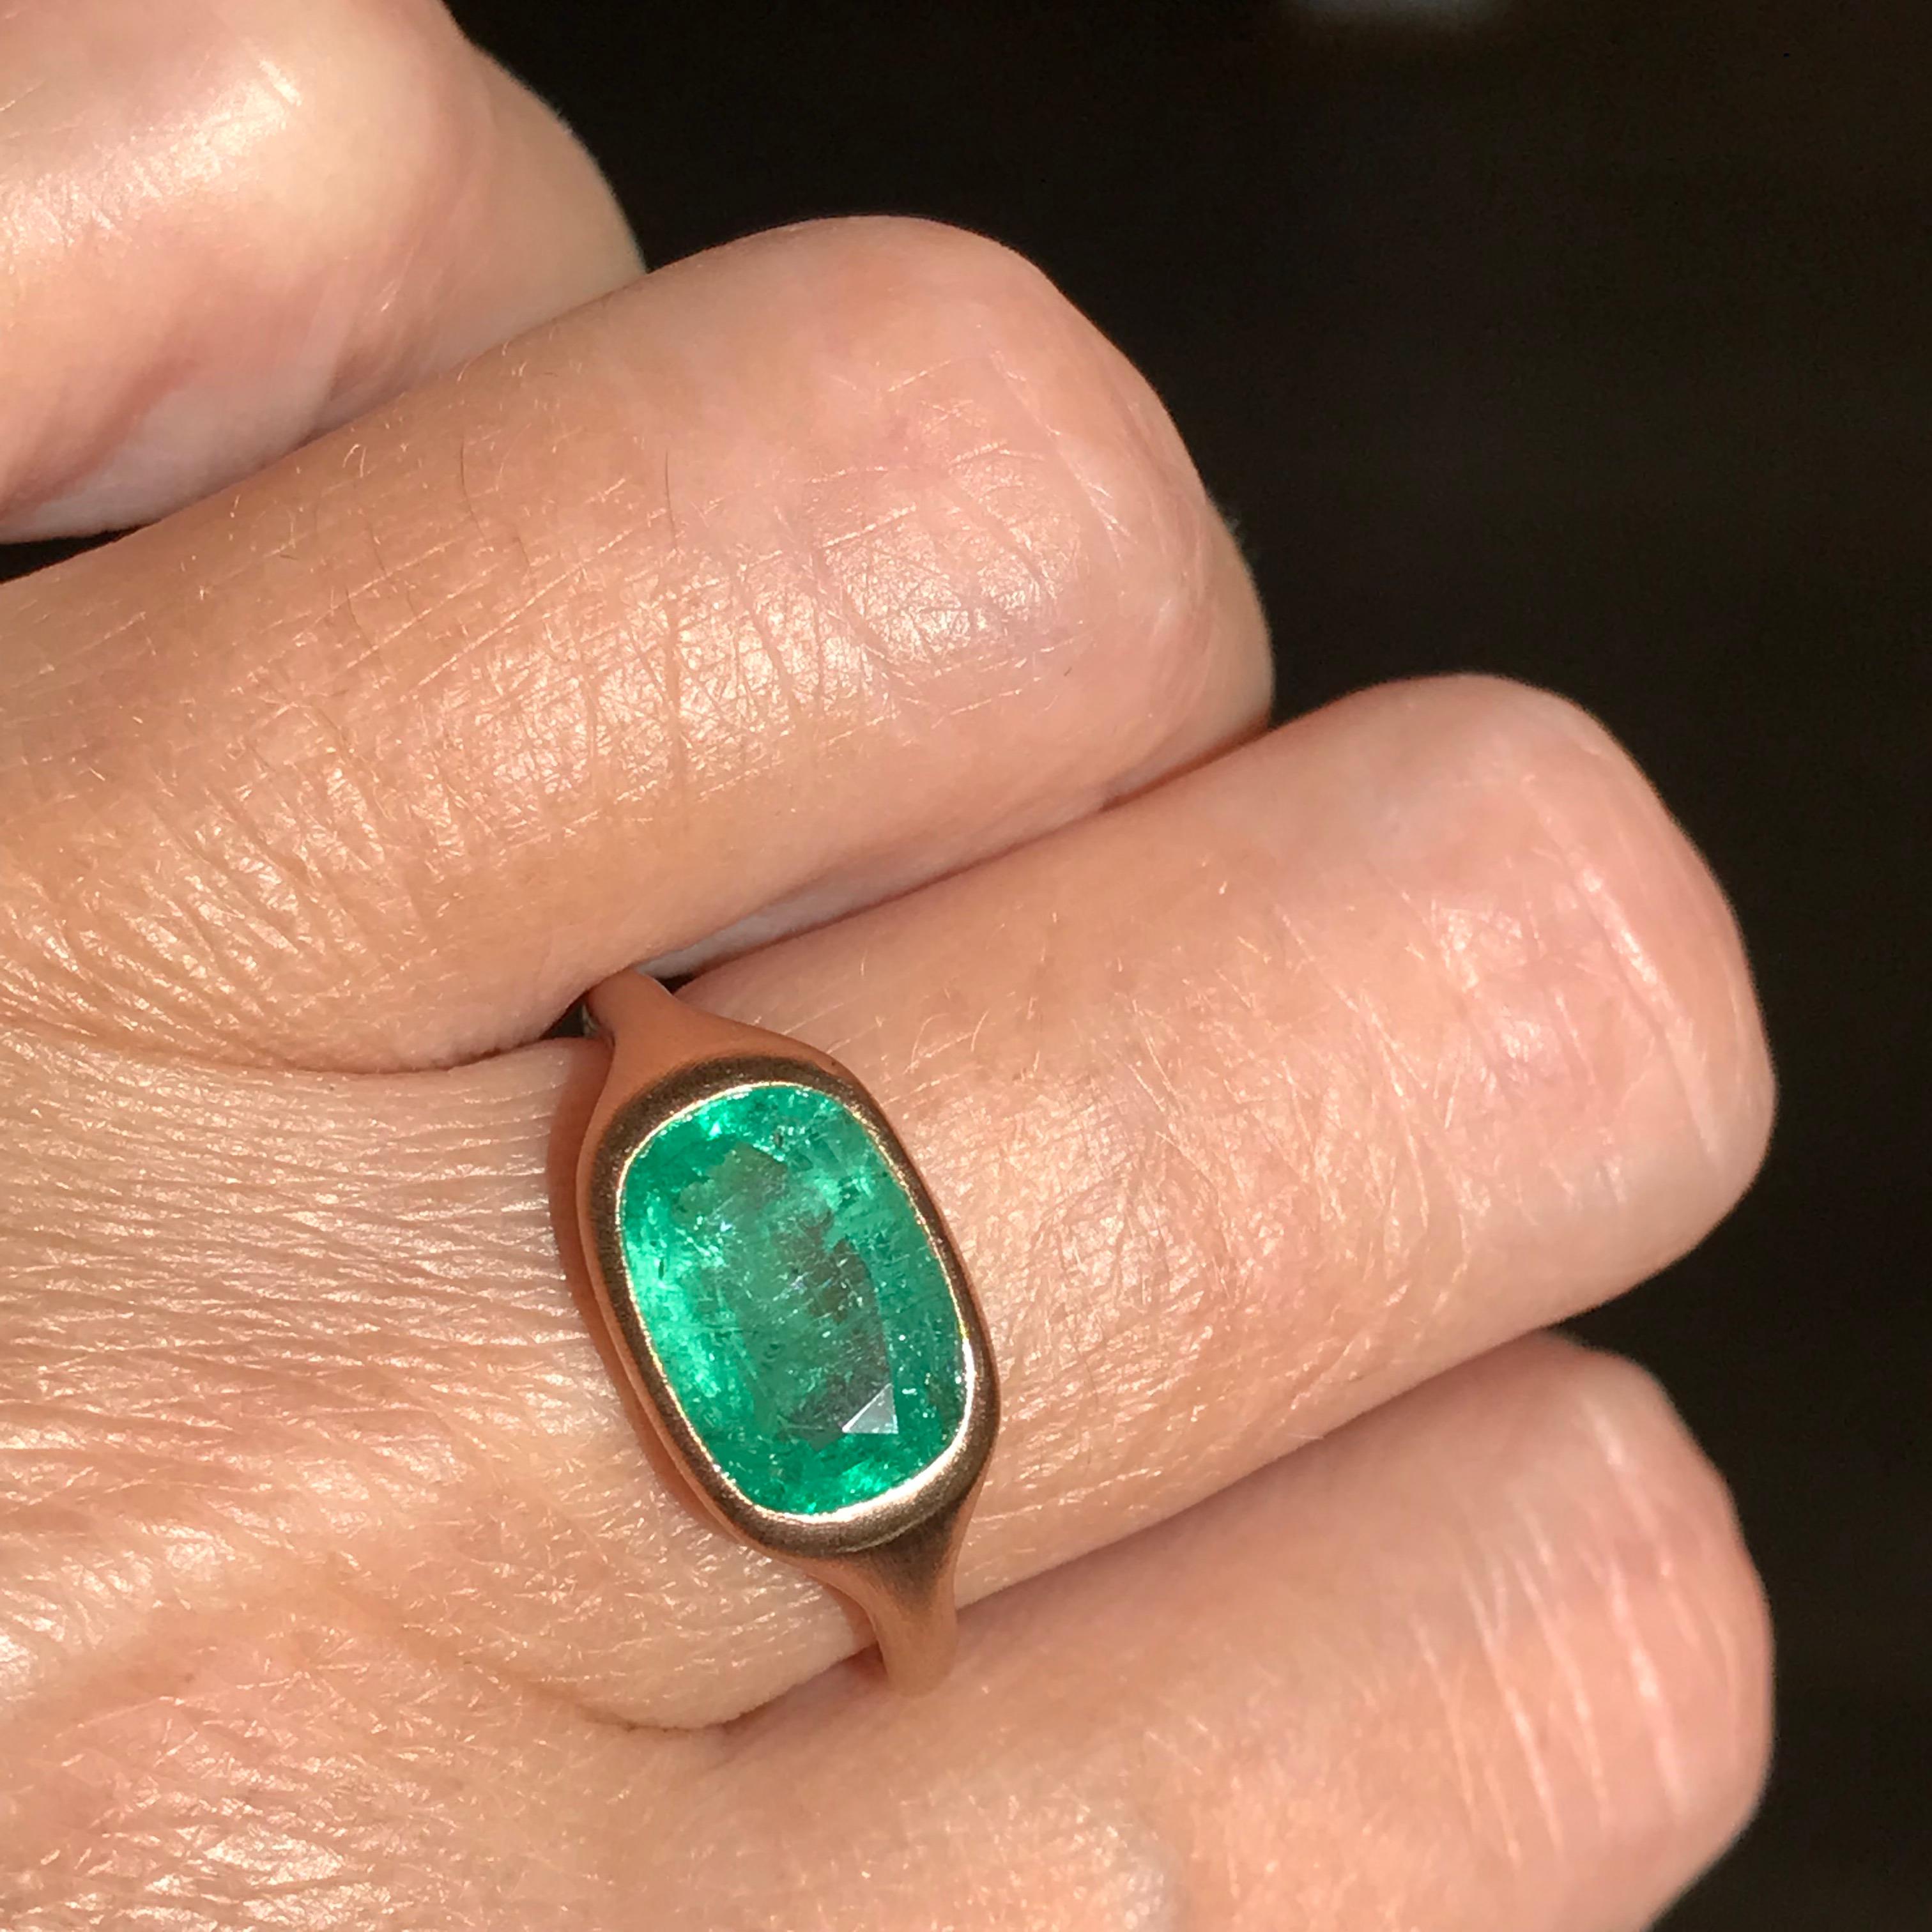 Dalben design One of a Kind 18k rose gold satin finishing ring with a 2,65 carat bezel-set cushion cut emerald. 
Ring size 6 3/4 USA - EU 54 re-sizable to most finger sizes. 
Bezel stone dimensions :
width 12 mm
height 8,7 mm
The ring has been